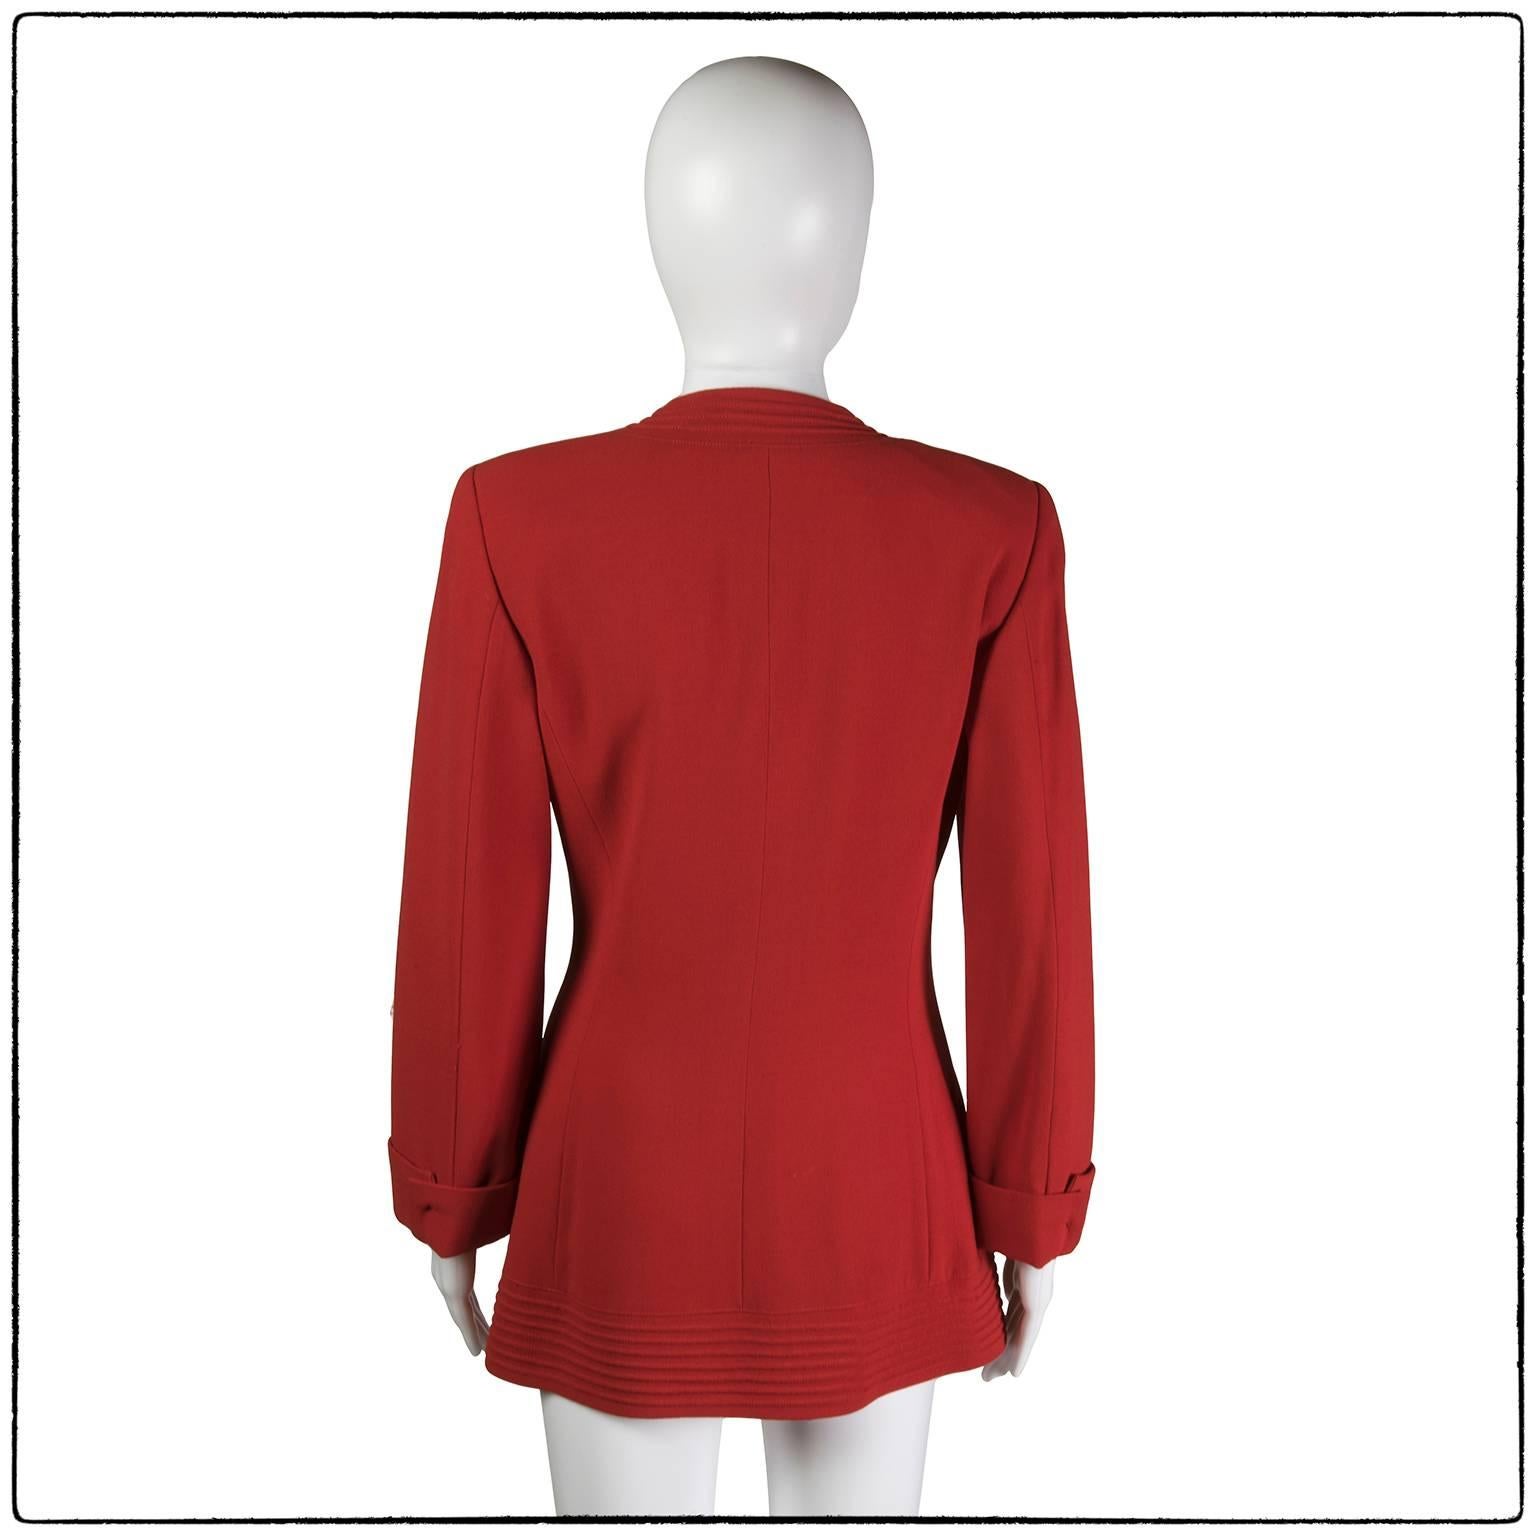 Vintage Ungaro Solo Donna Paris Red Jacket,1980s
Red wool jacket features oriental shape with gold tone metal beautiful buttons

Brand: Ungaro

Size : 40 IT, 8 UK, 4 US

Material: wool

Condition: good condition, Some light signs of wear

Approx.